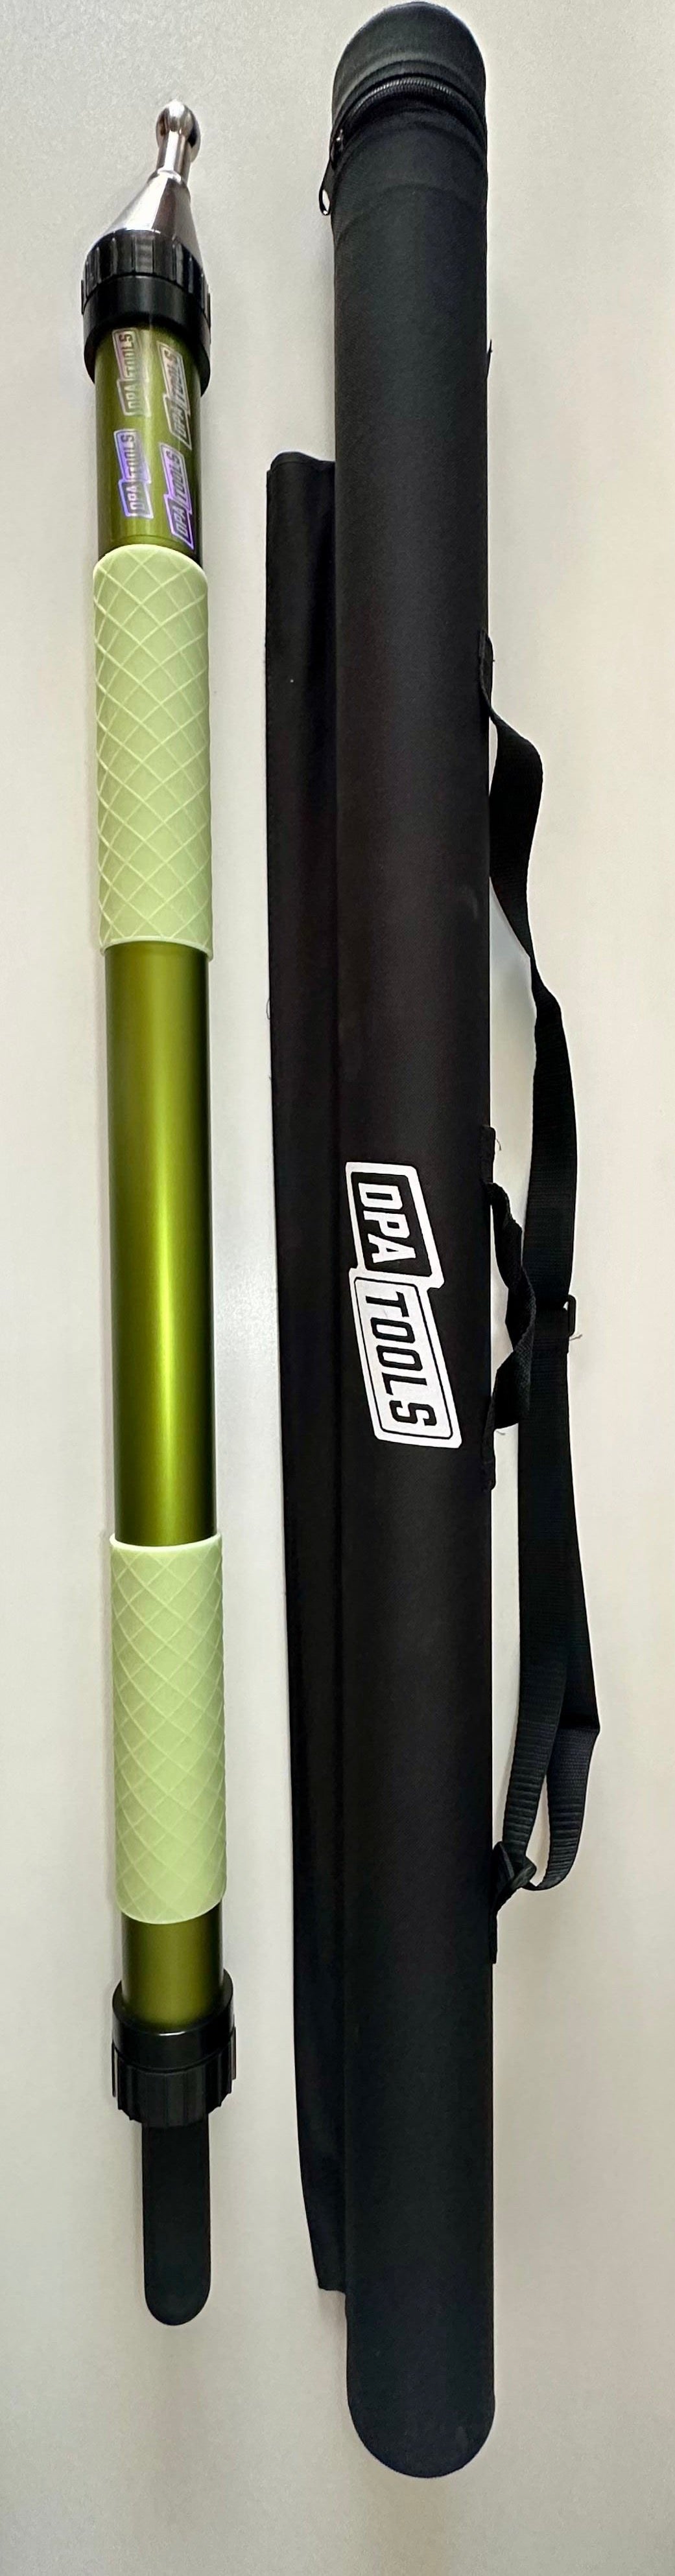 Dpatools 42" Compound tube and Case